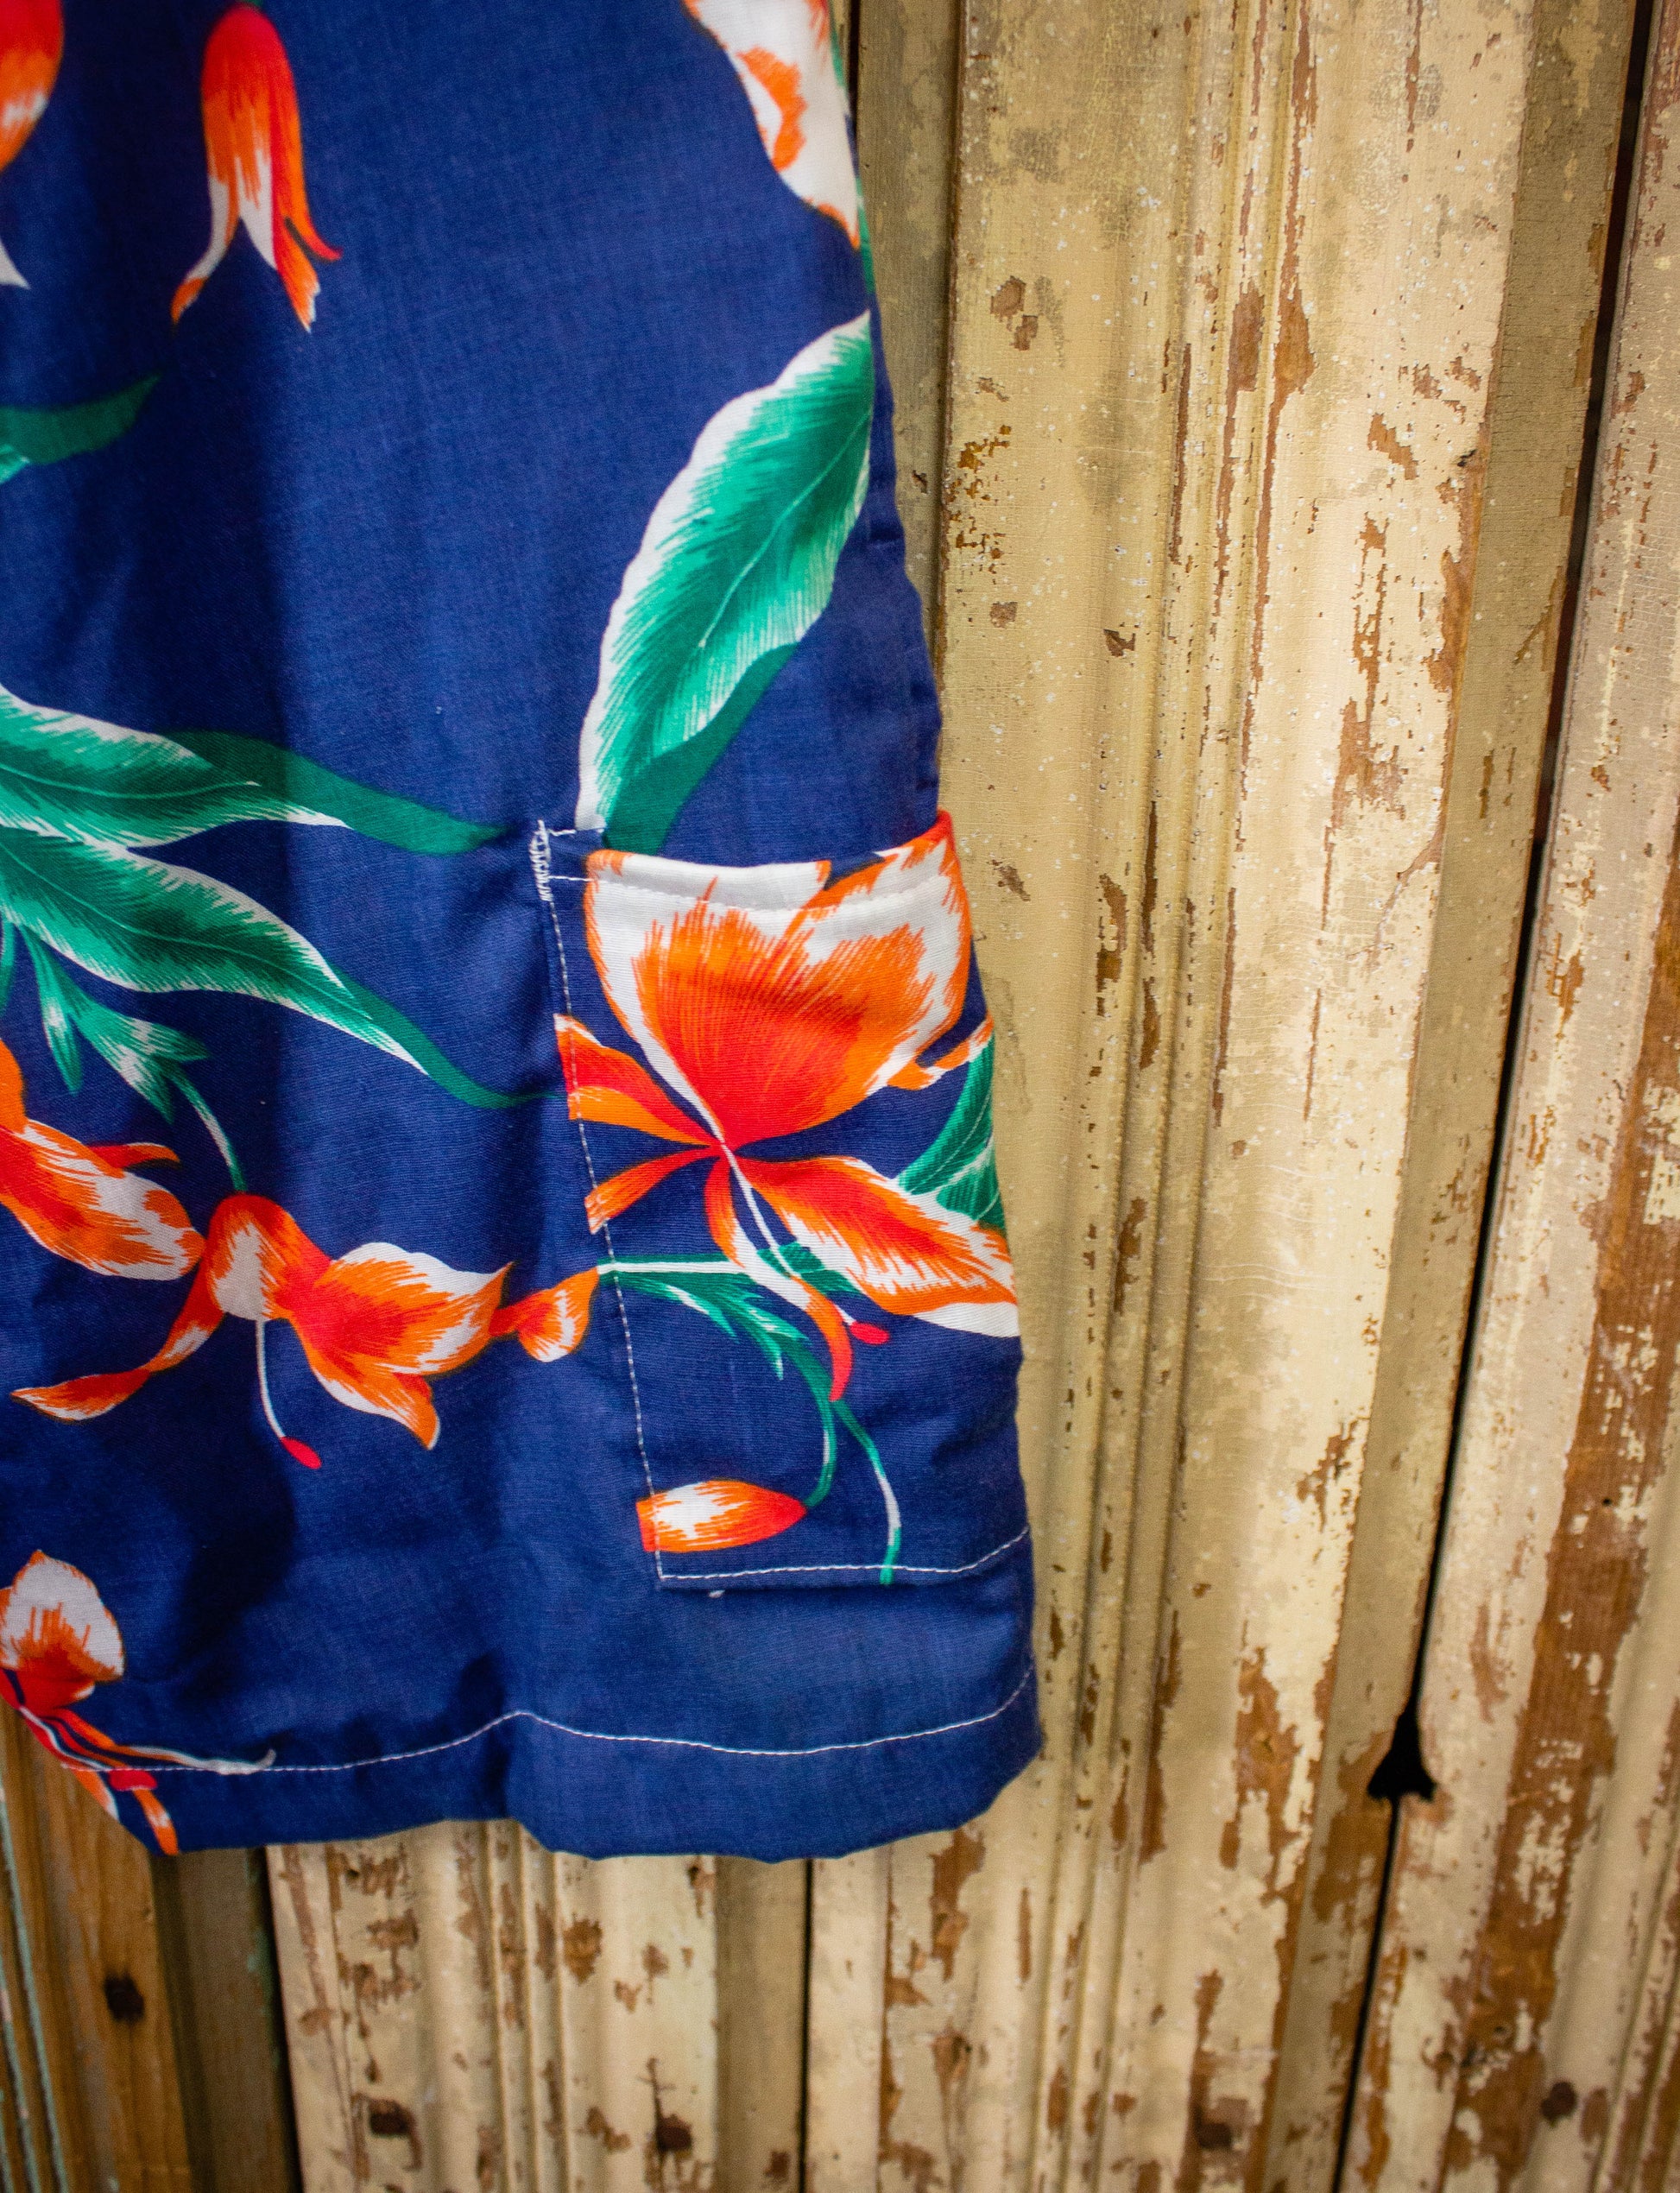 Vintage Beach Breakers Blue Floral Board Shorts 80s Small